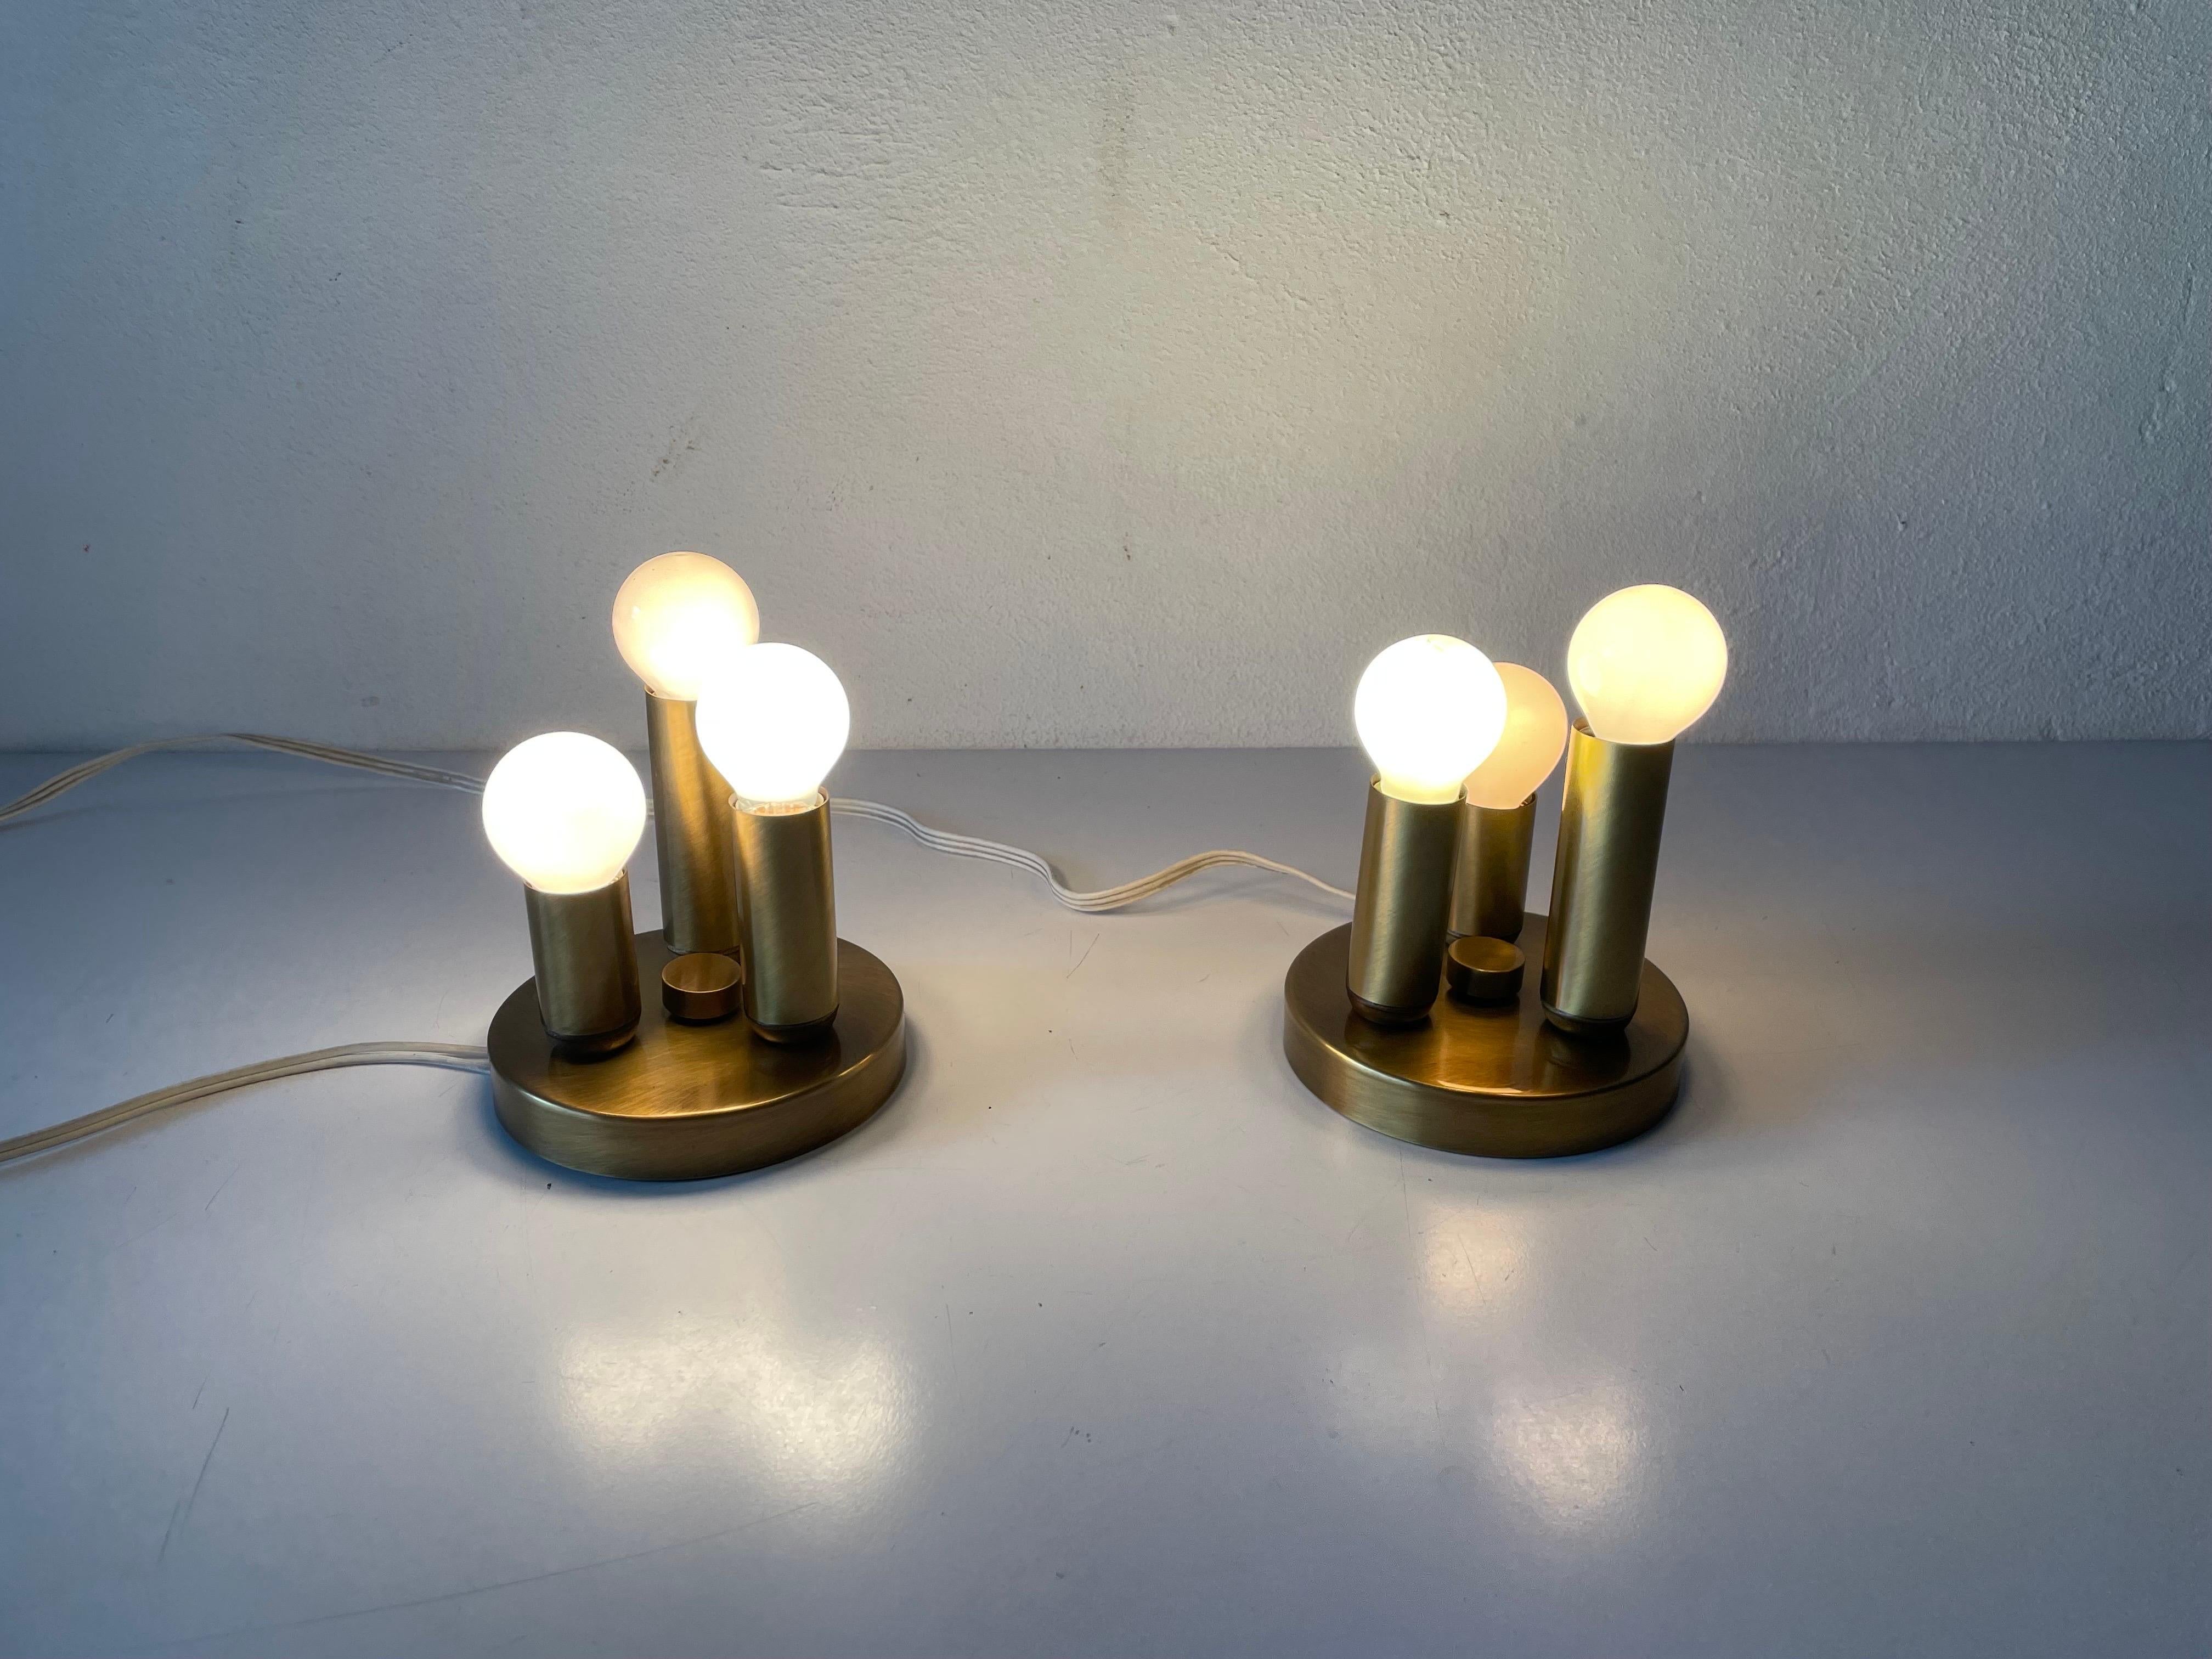 Antique Gold Metal Triple Tube Pair of Ceiling Lamps by TZ, 1960s Germany For Sale 3